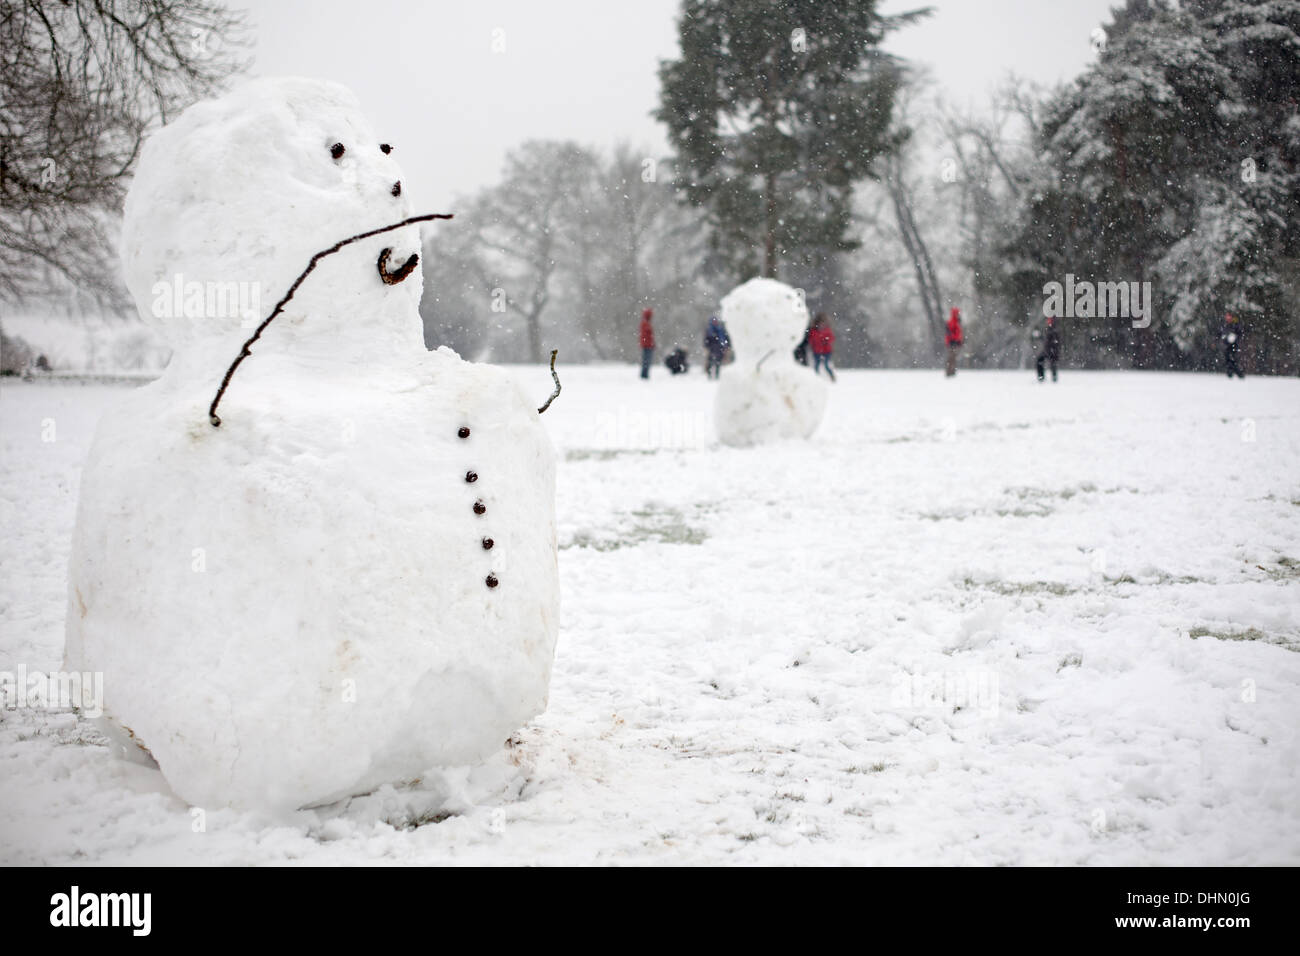 Snowman in parkland setting with people having a snowball fight in the distance Stock Photo